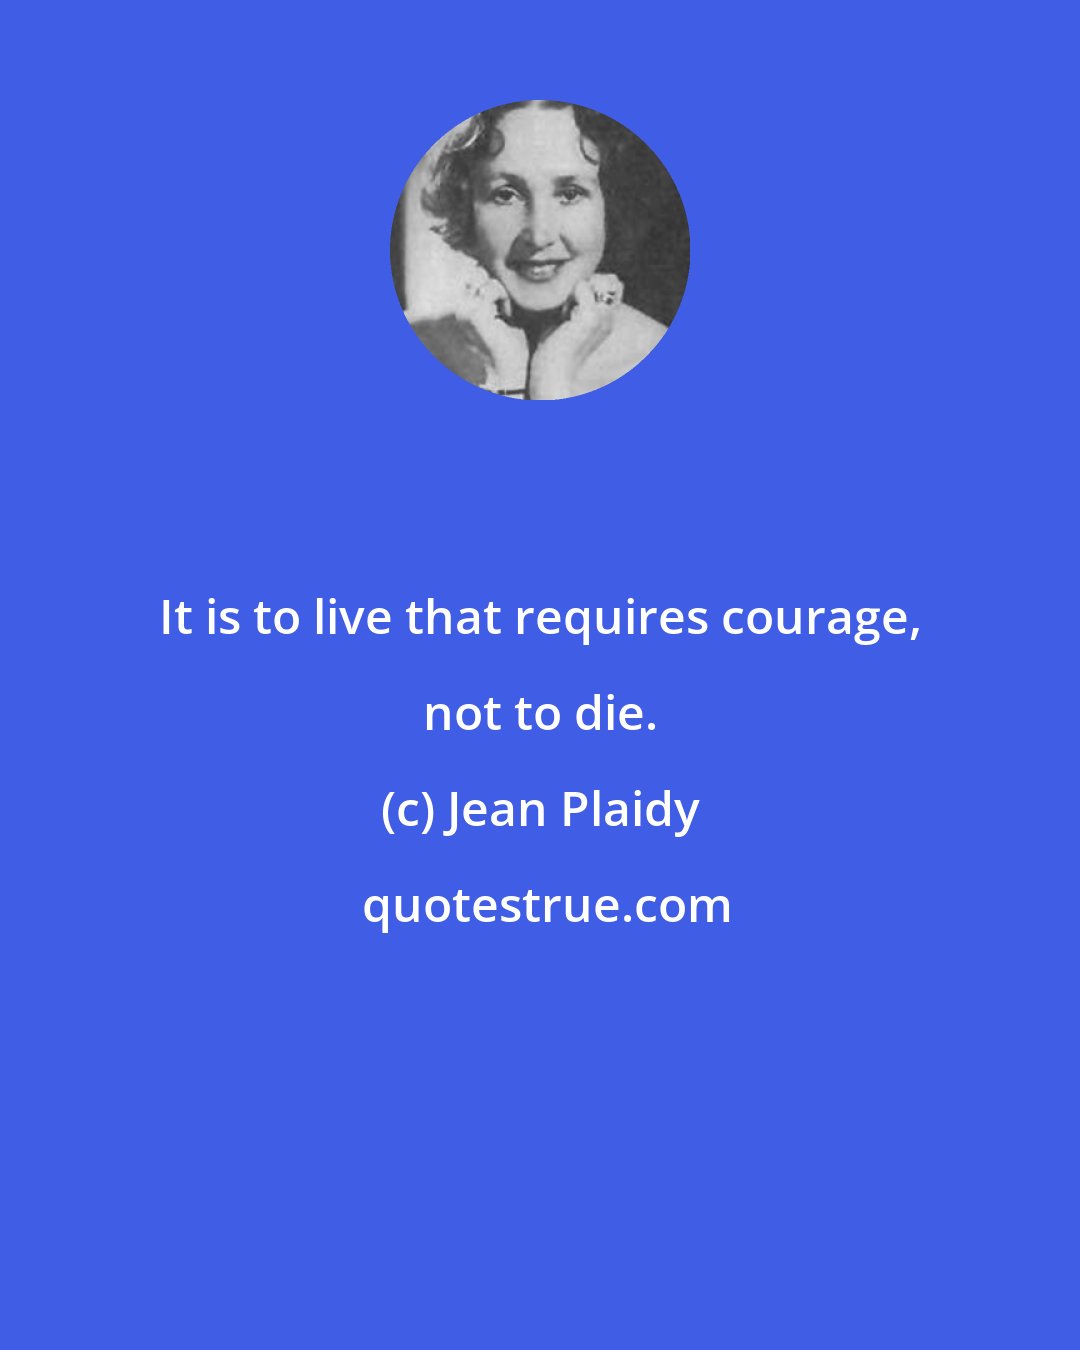 Jean Plaidy: It is to live that requires courage, not to die.